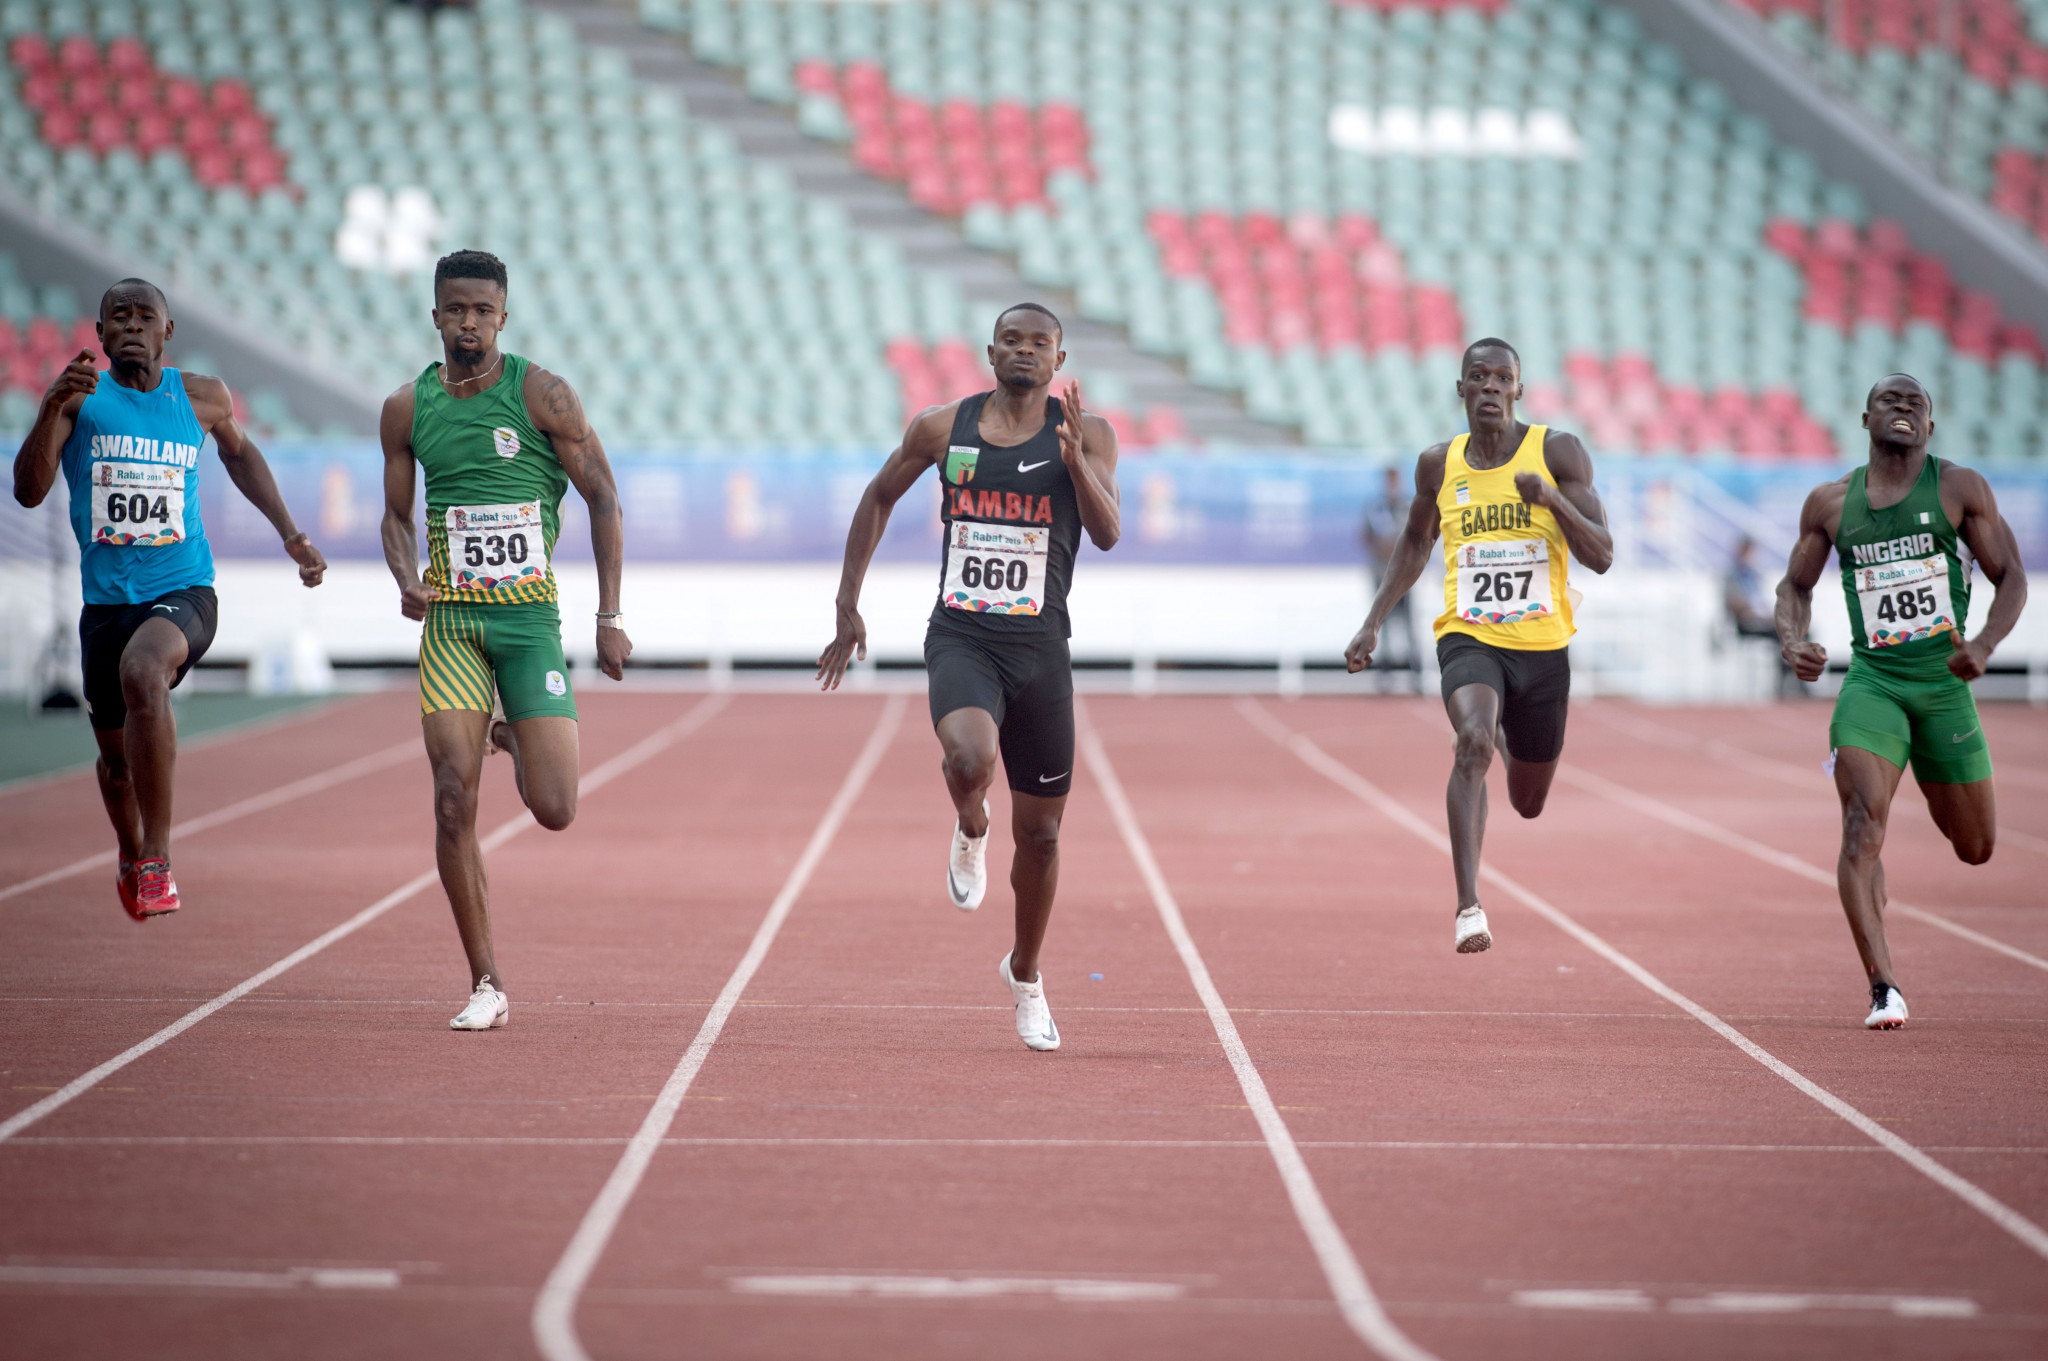  Nigeria withdraws late offer to stage African Athletics Championships